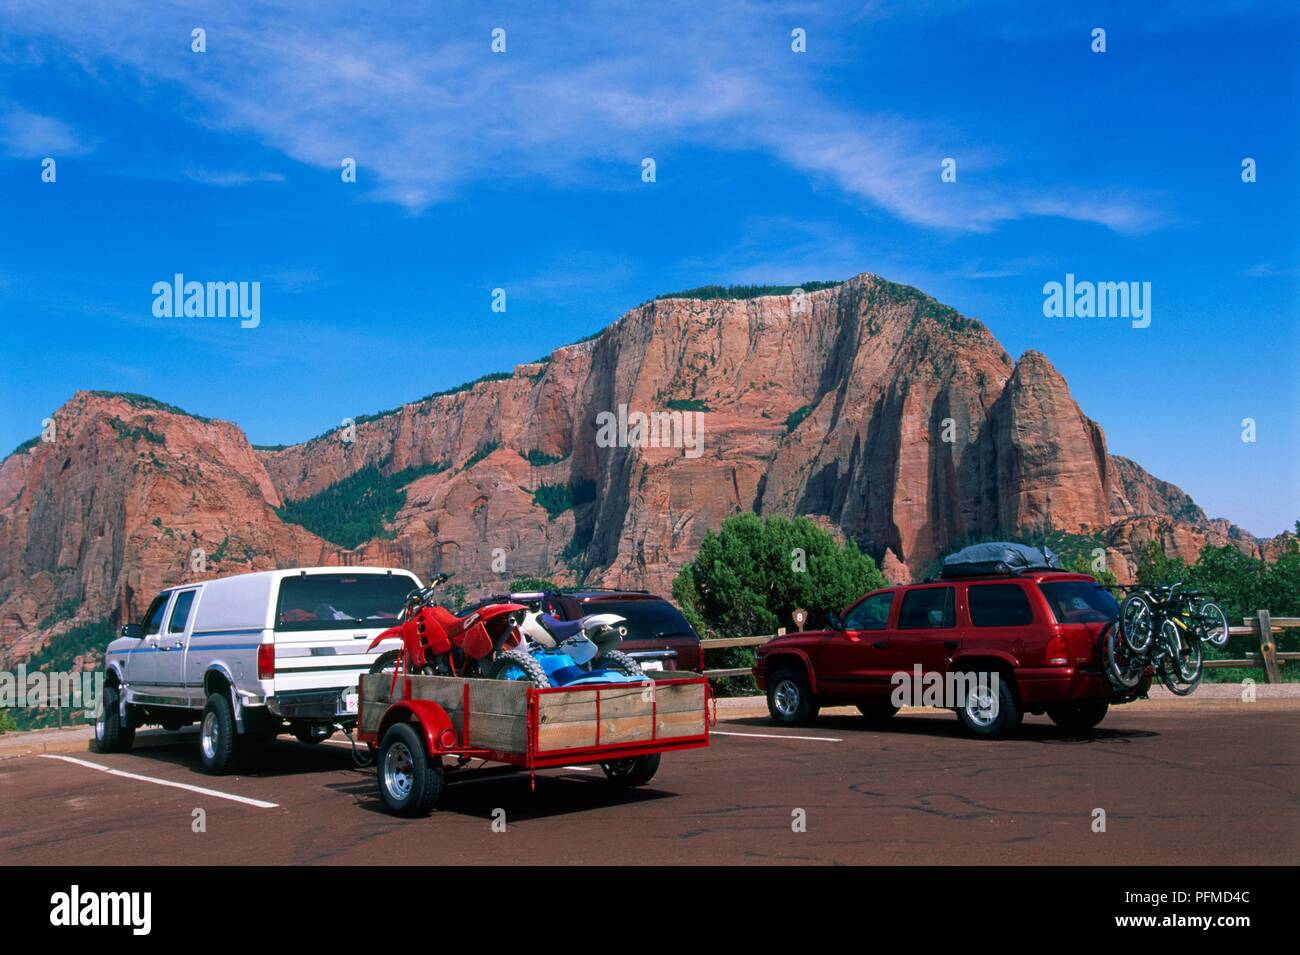 USA, Nevada, sports utility vehicles parked in view of mountains Stock Photo